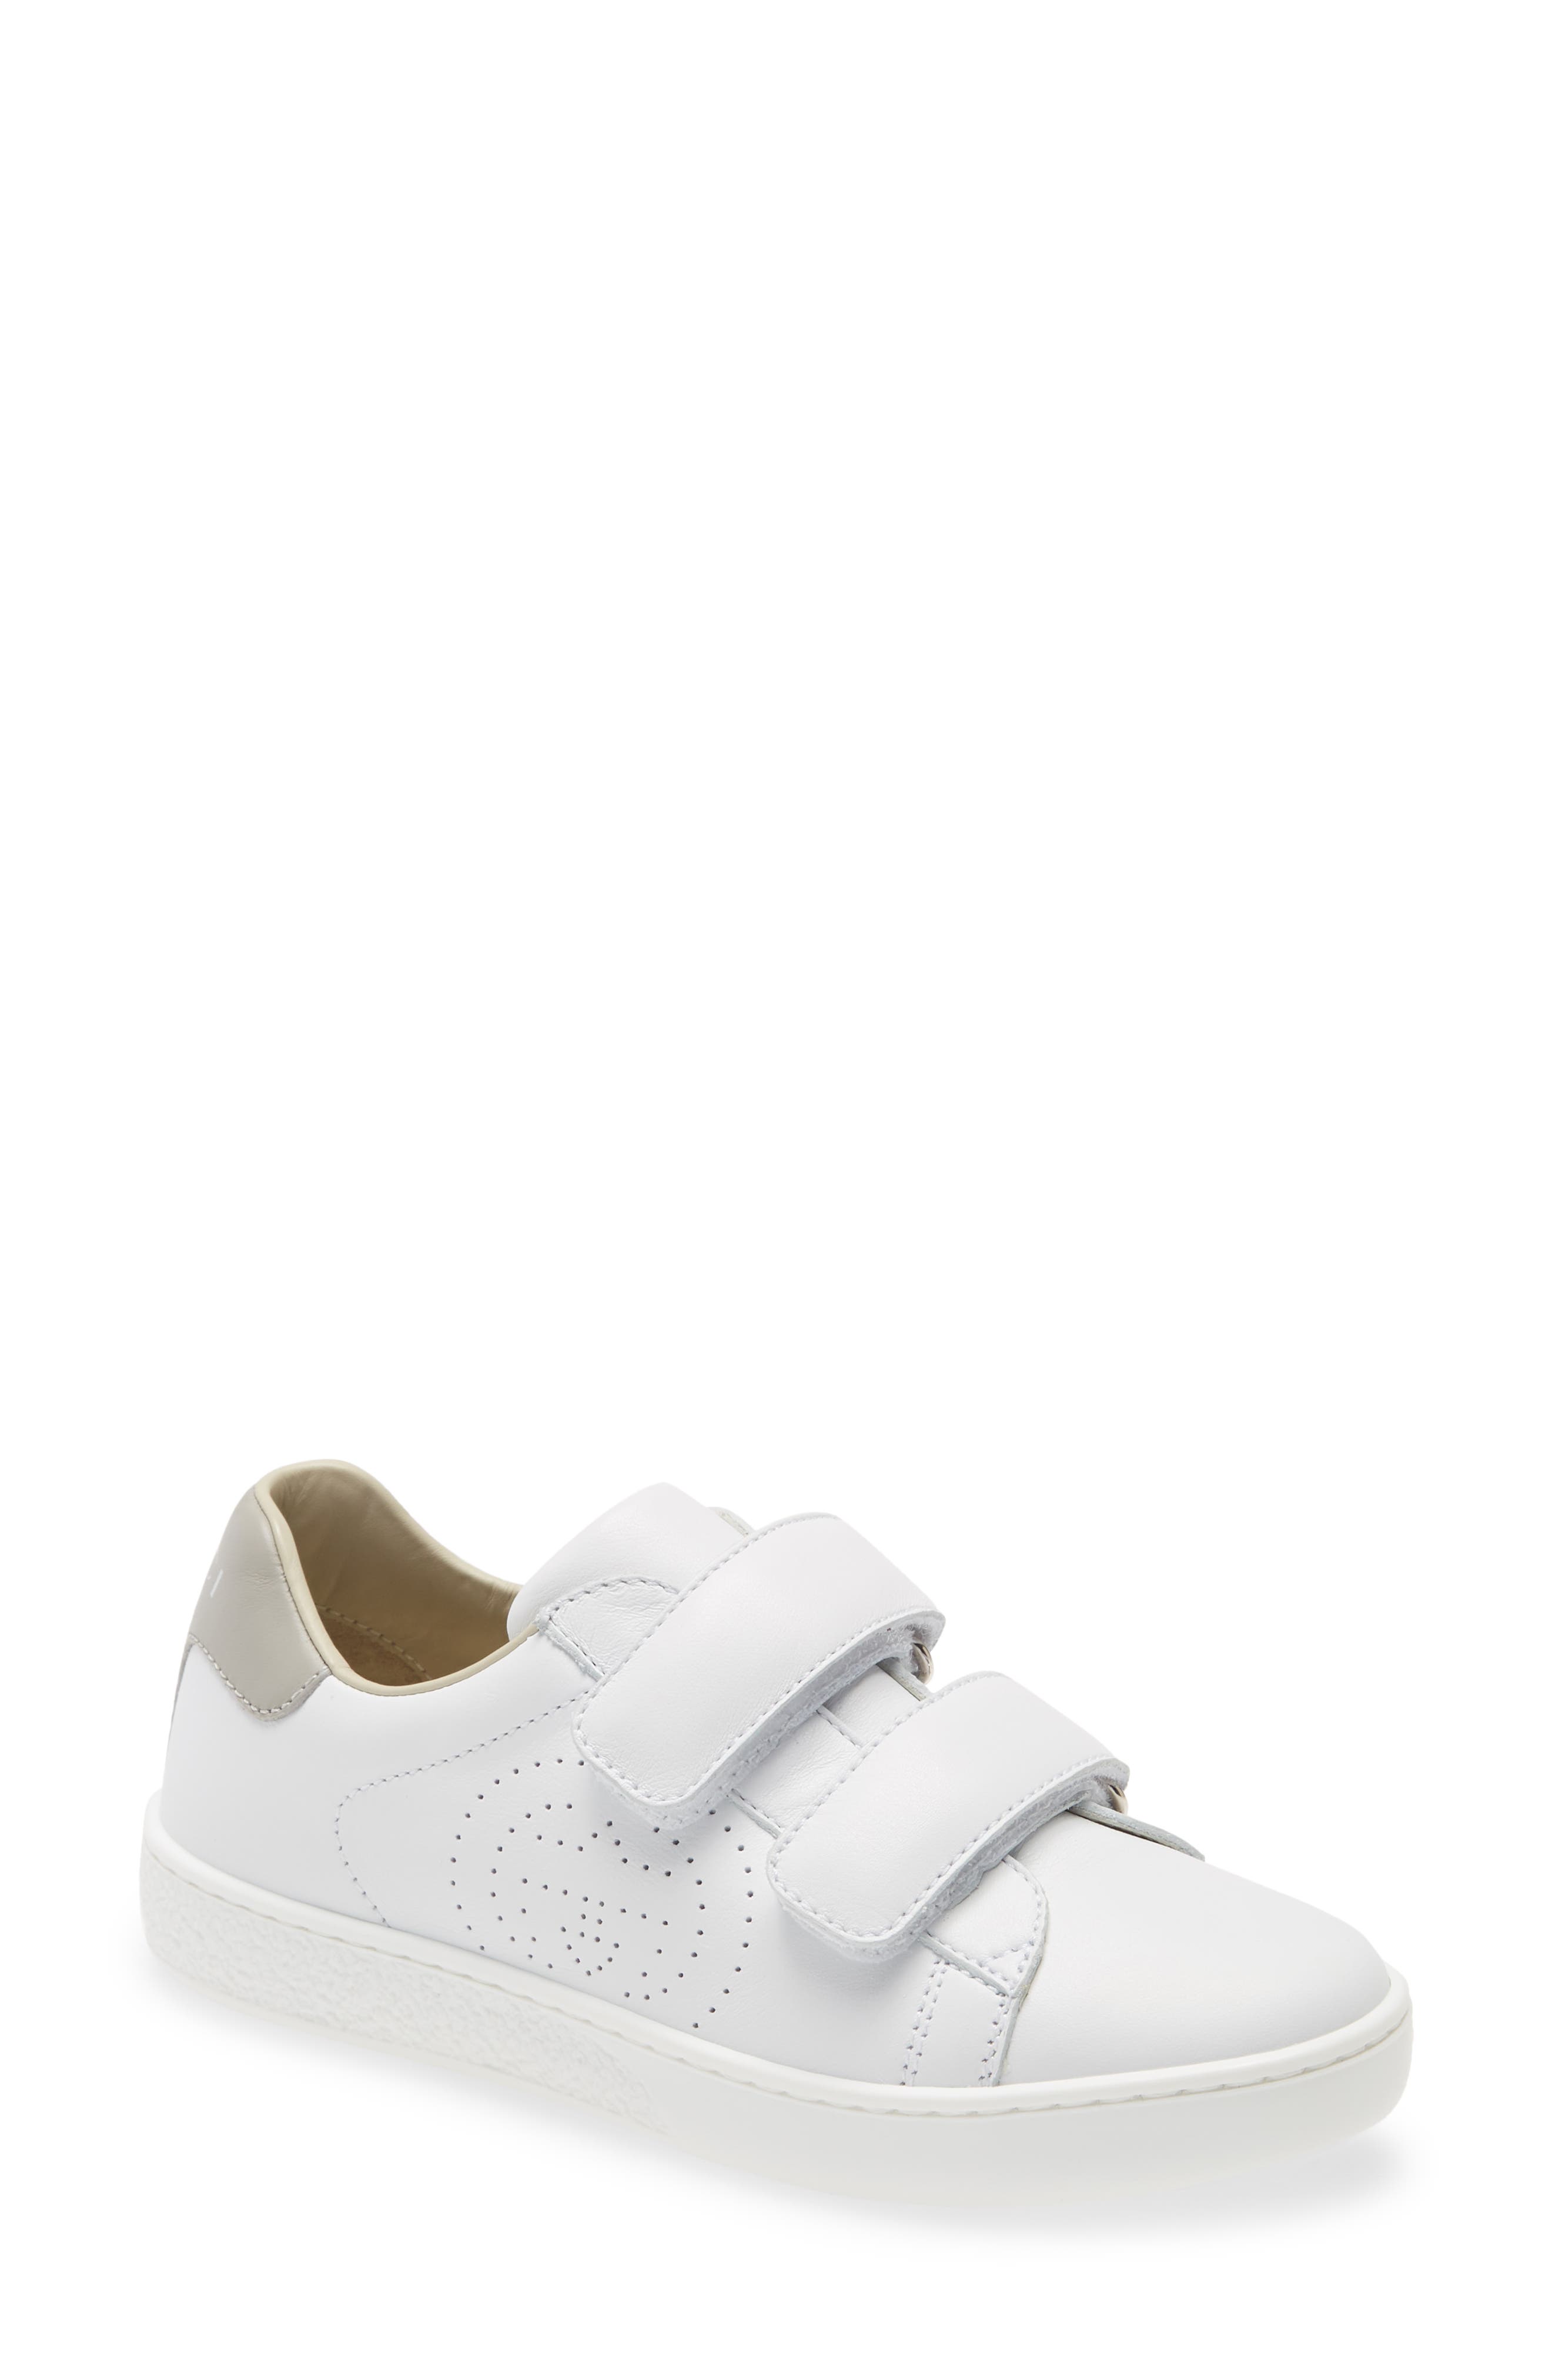 Kids' Gucci Shoes | Nordstrom